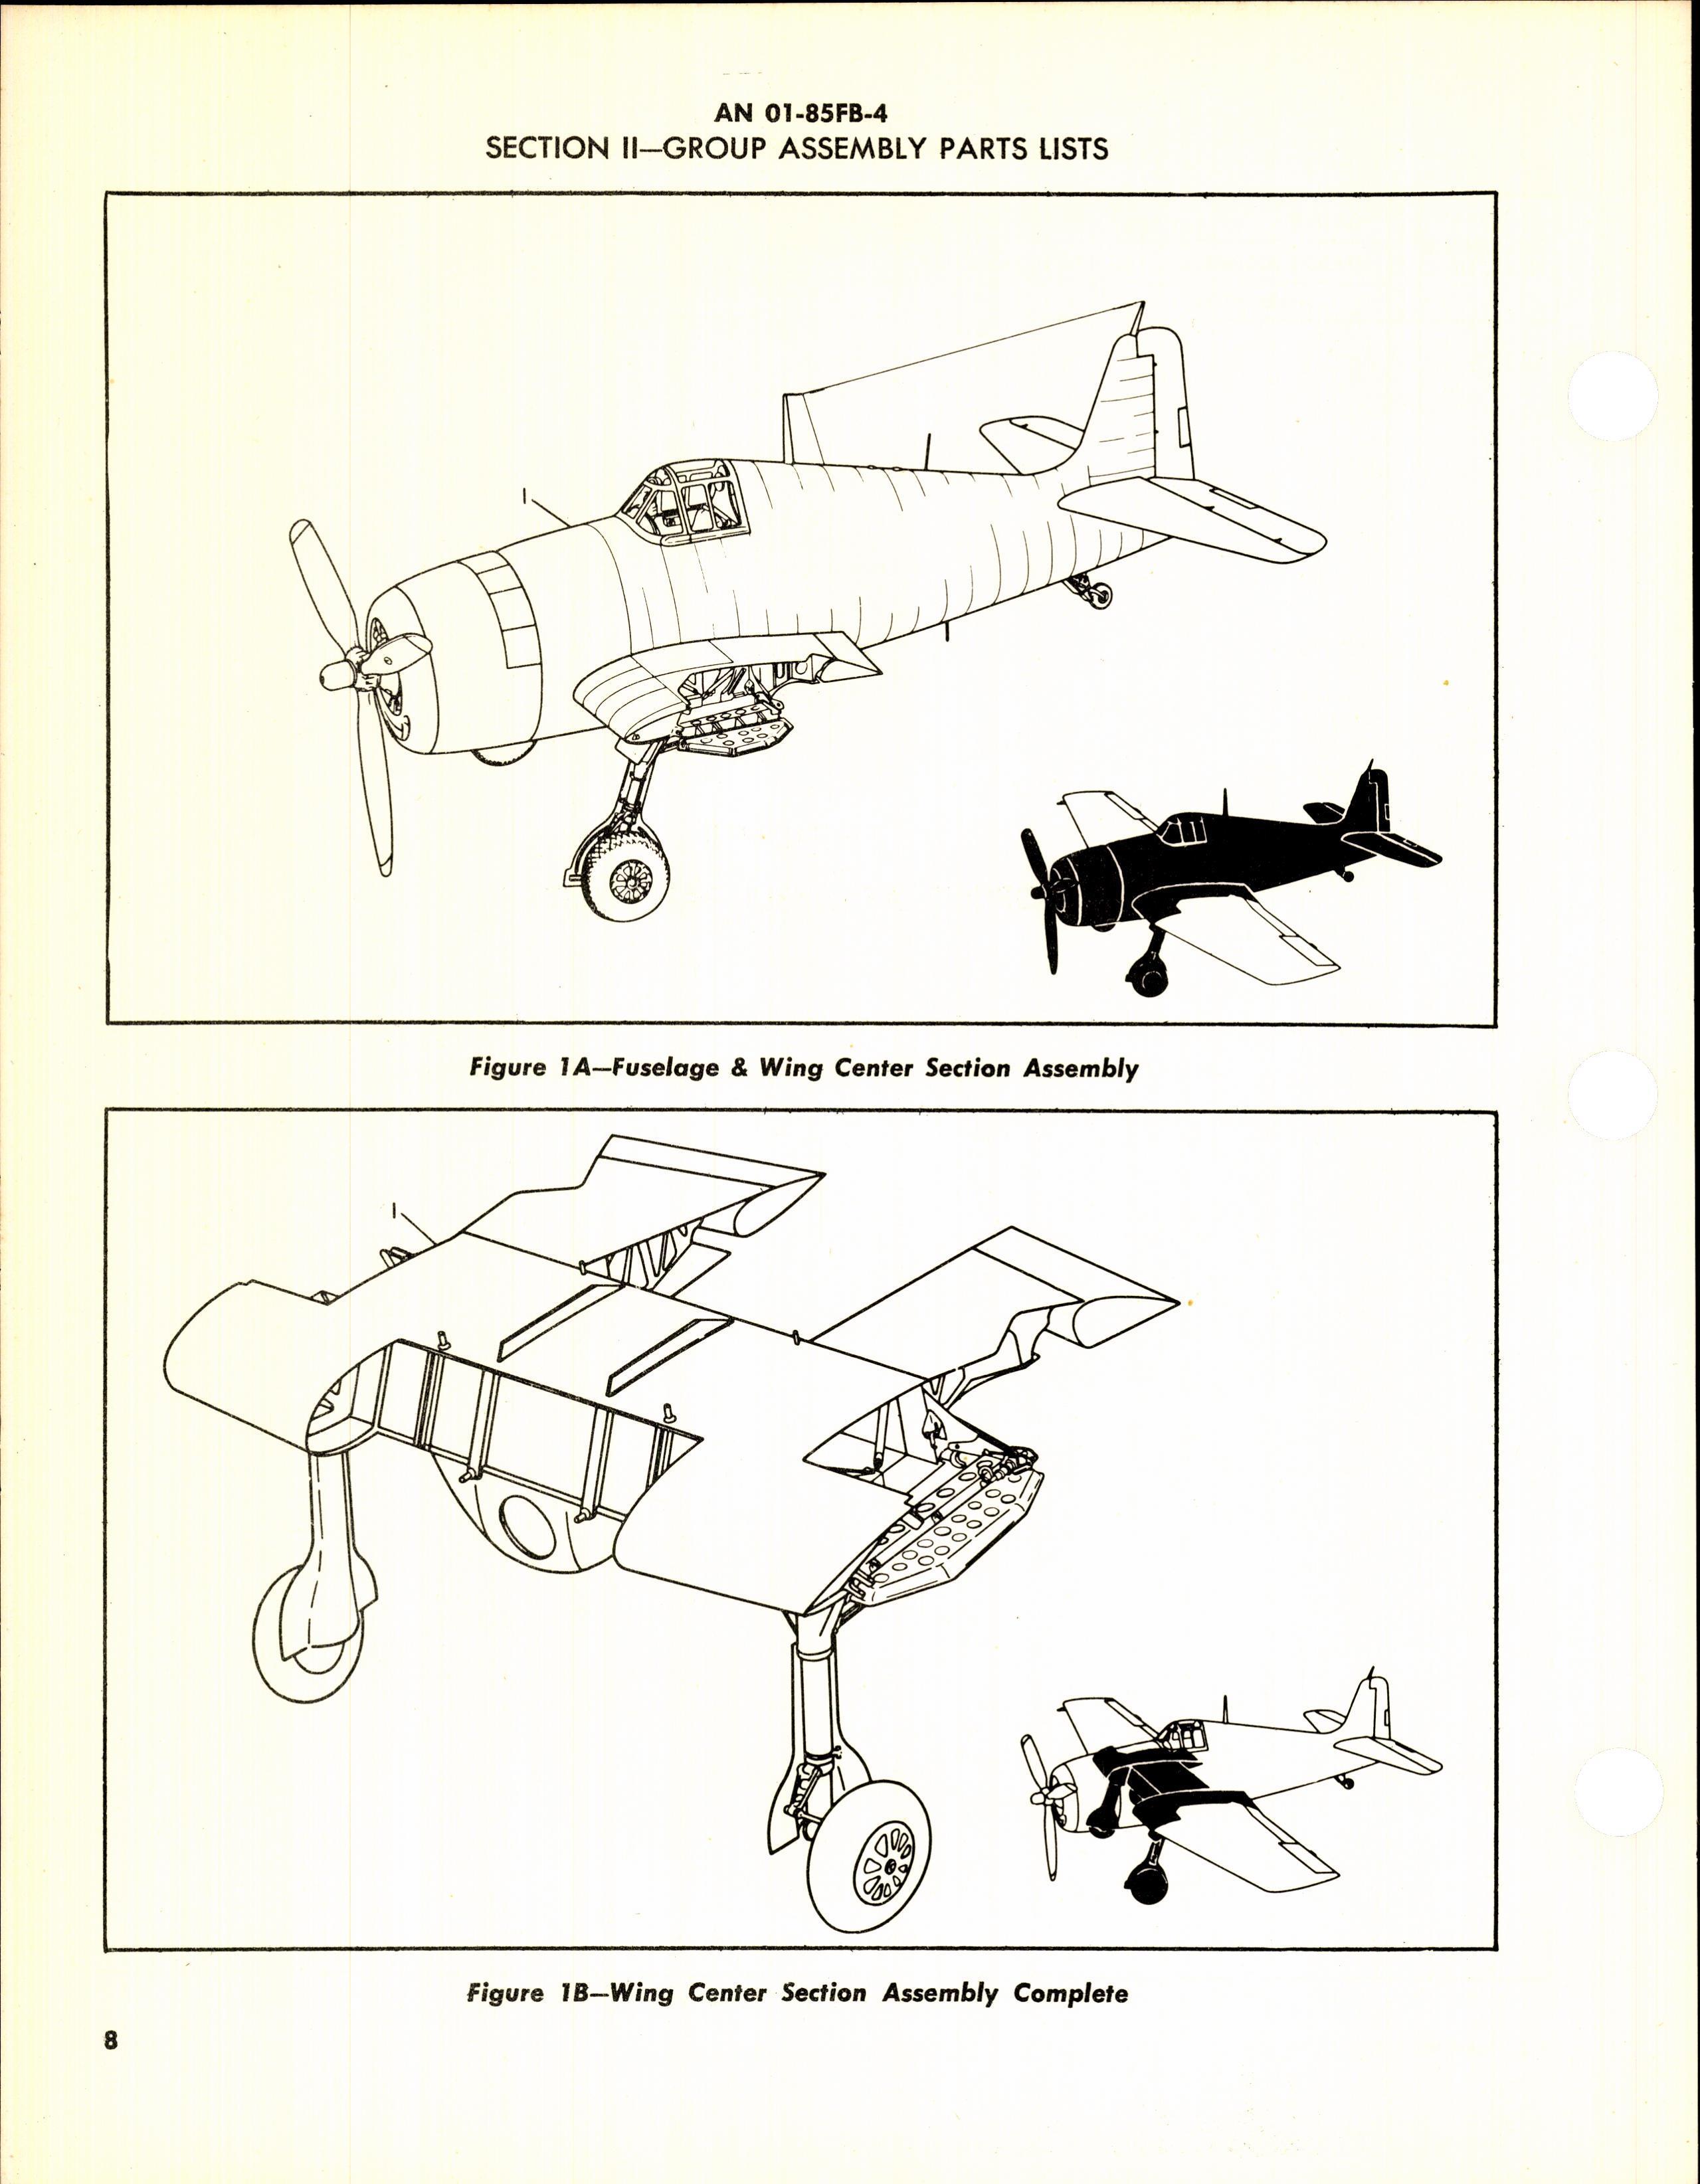 Sample page 20 from AirCorps Library document: Parts Catalog for F6F-3, F6F-3N, F6F-5, and F6F-5N